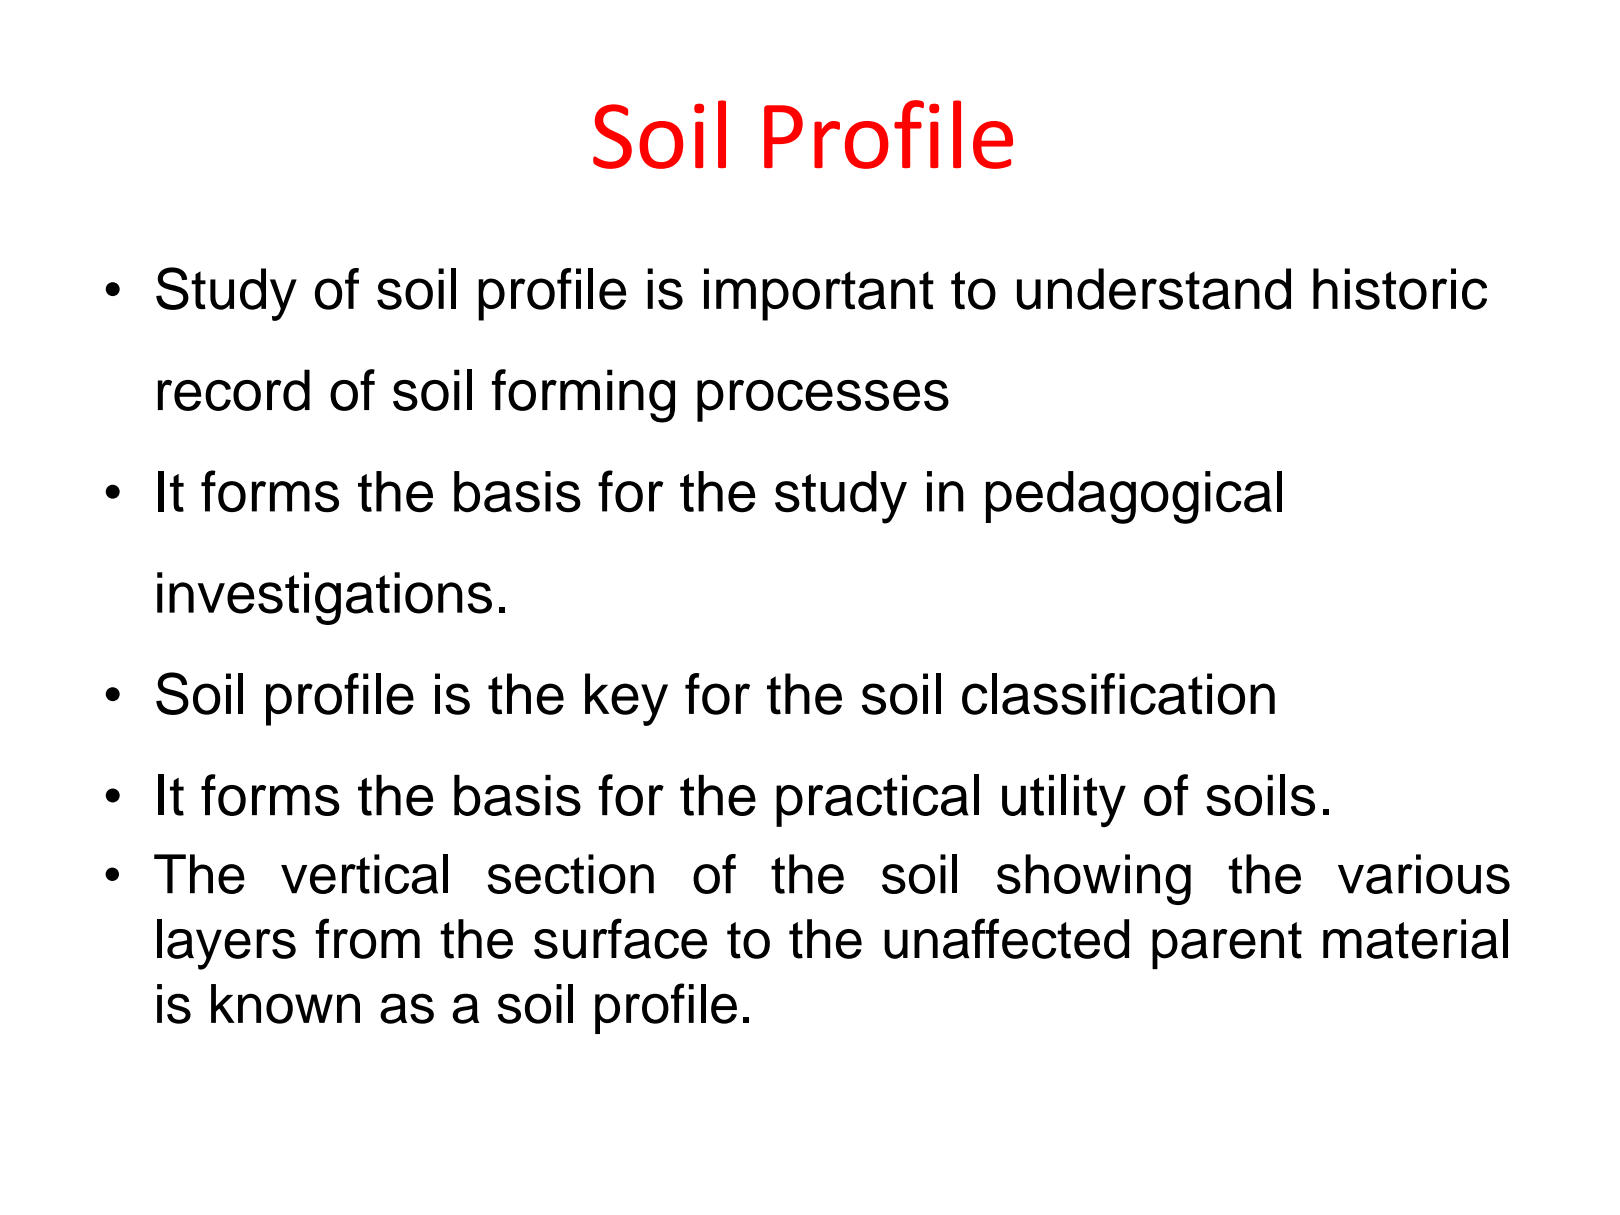 Why Understanding Soil is Crucial for Our Environment and Agriculture